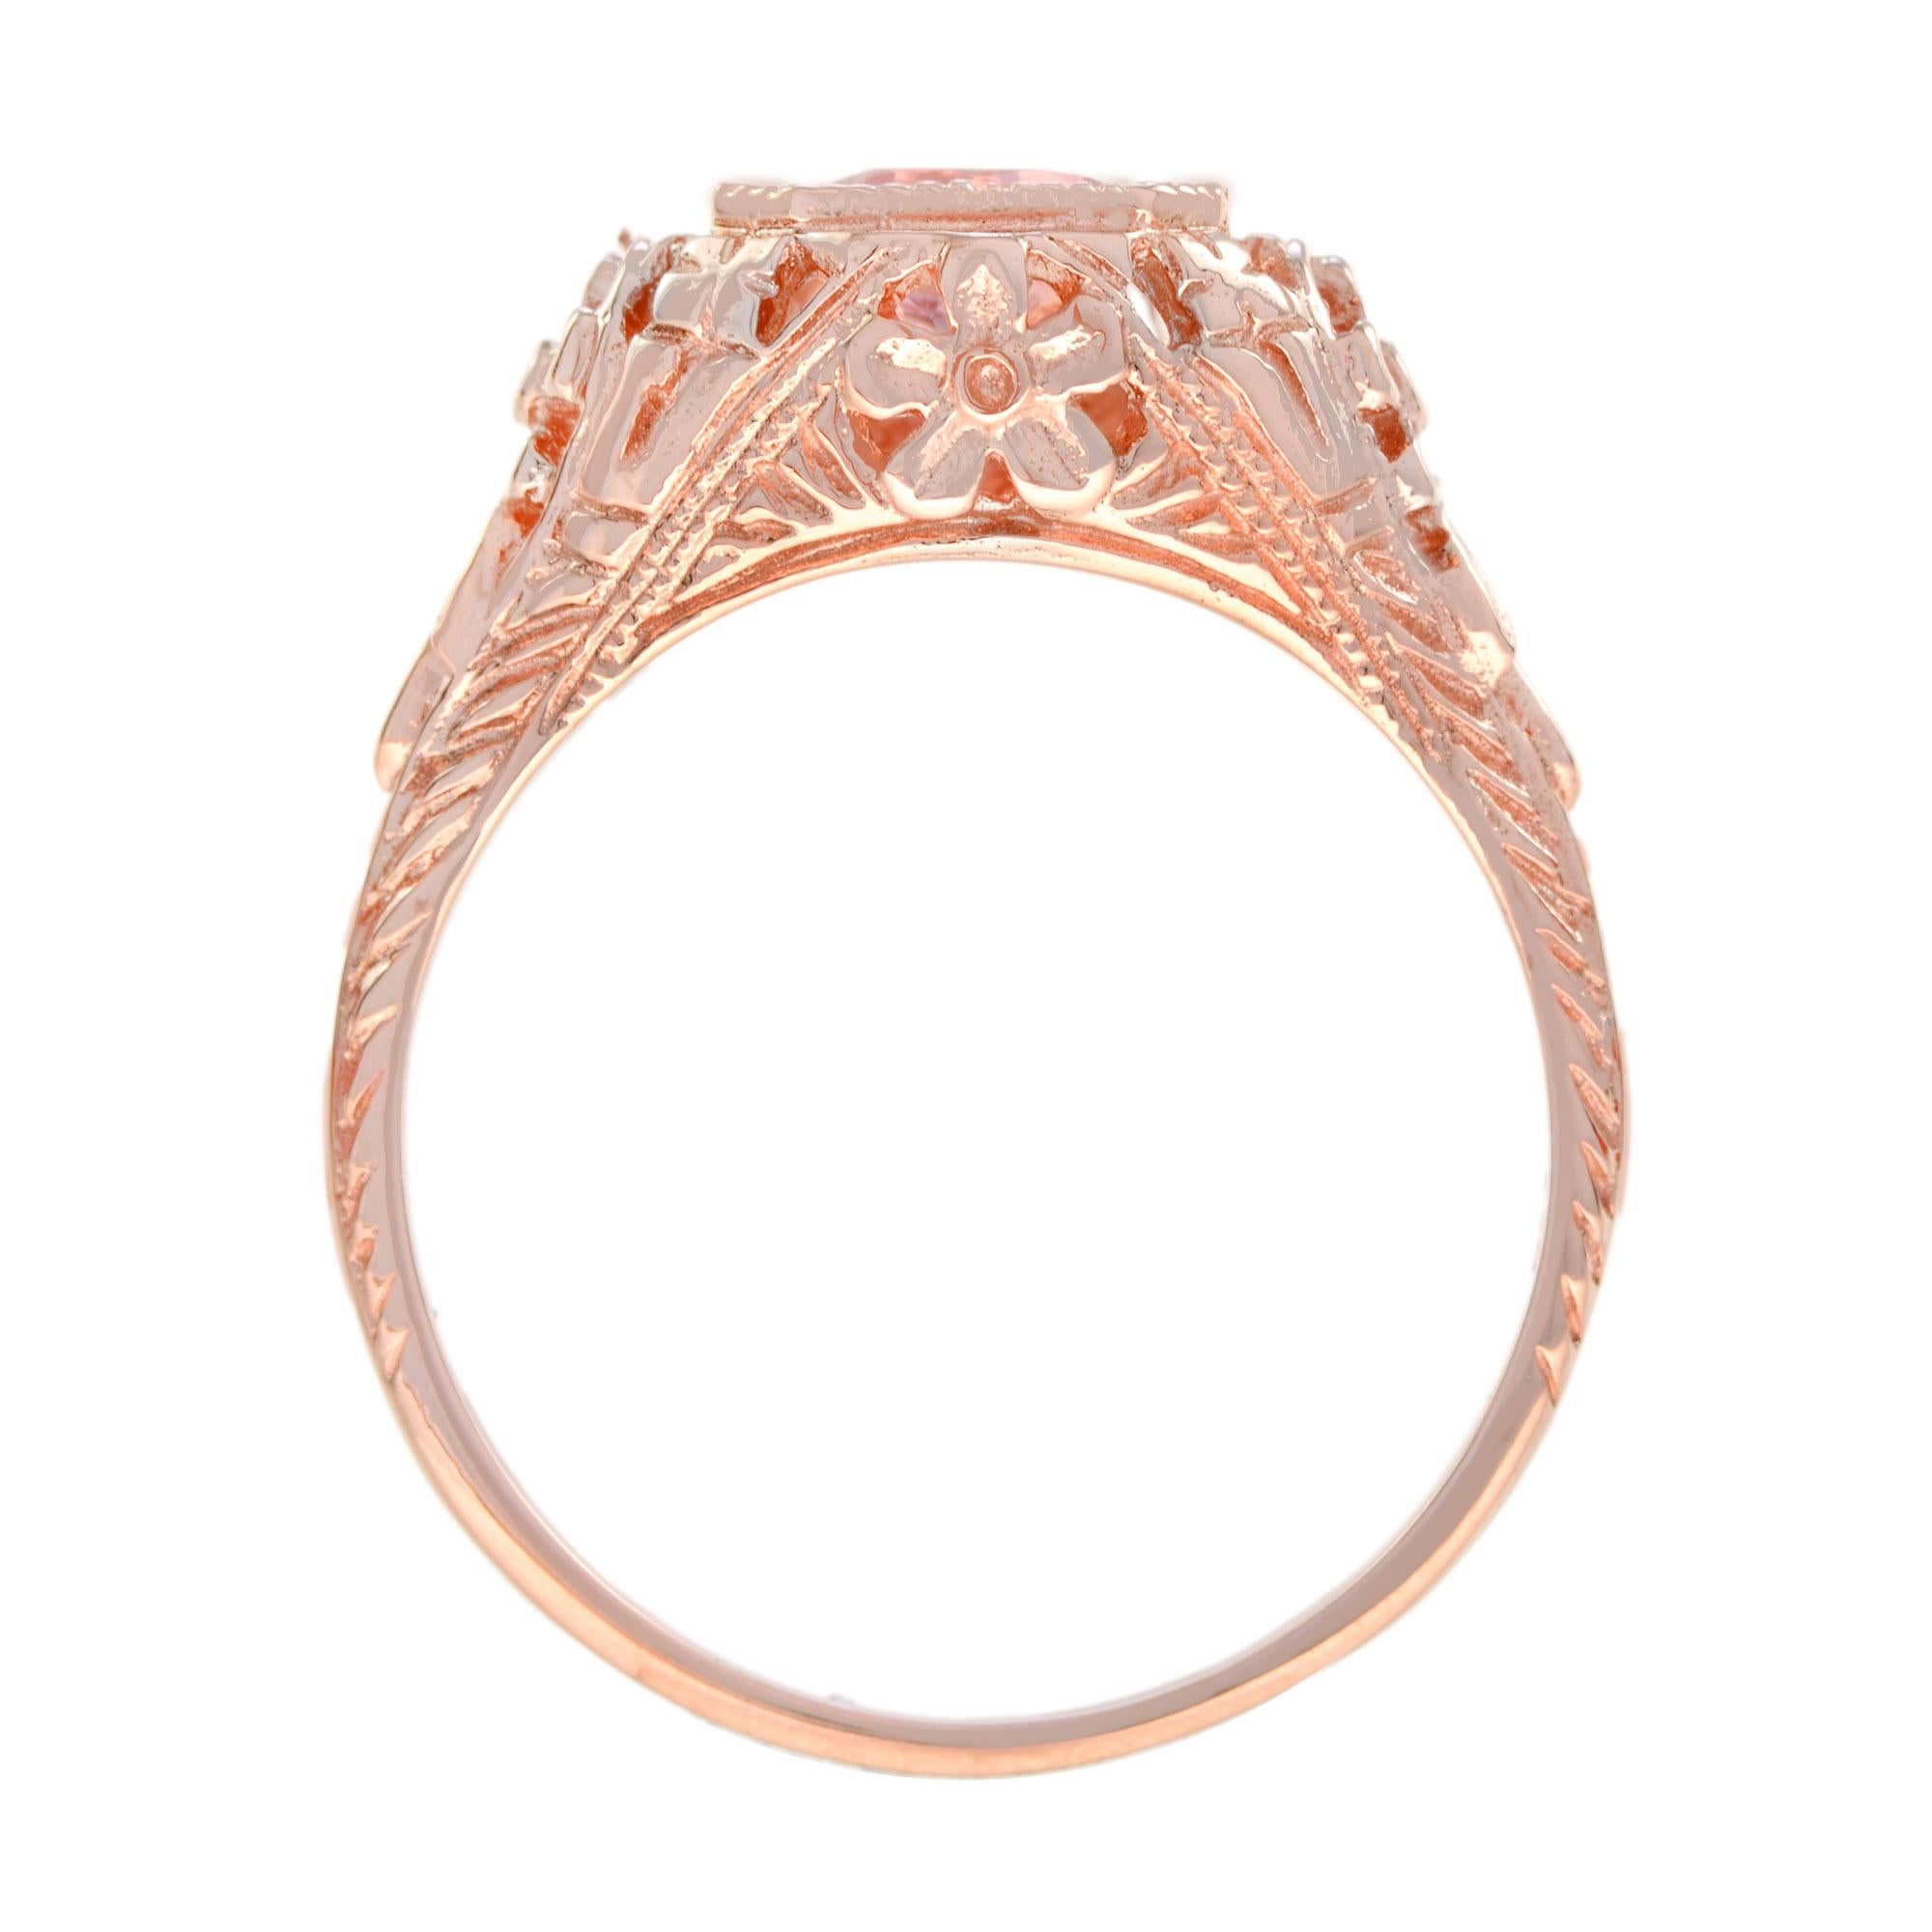 Women's Pink Tourmaline Art Deco Style Filigree Engagement Ring in 14K Rose Gold For Sale